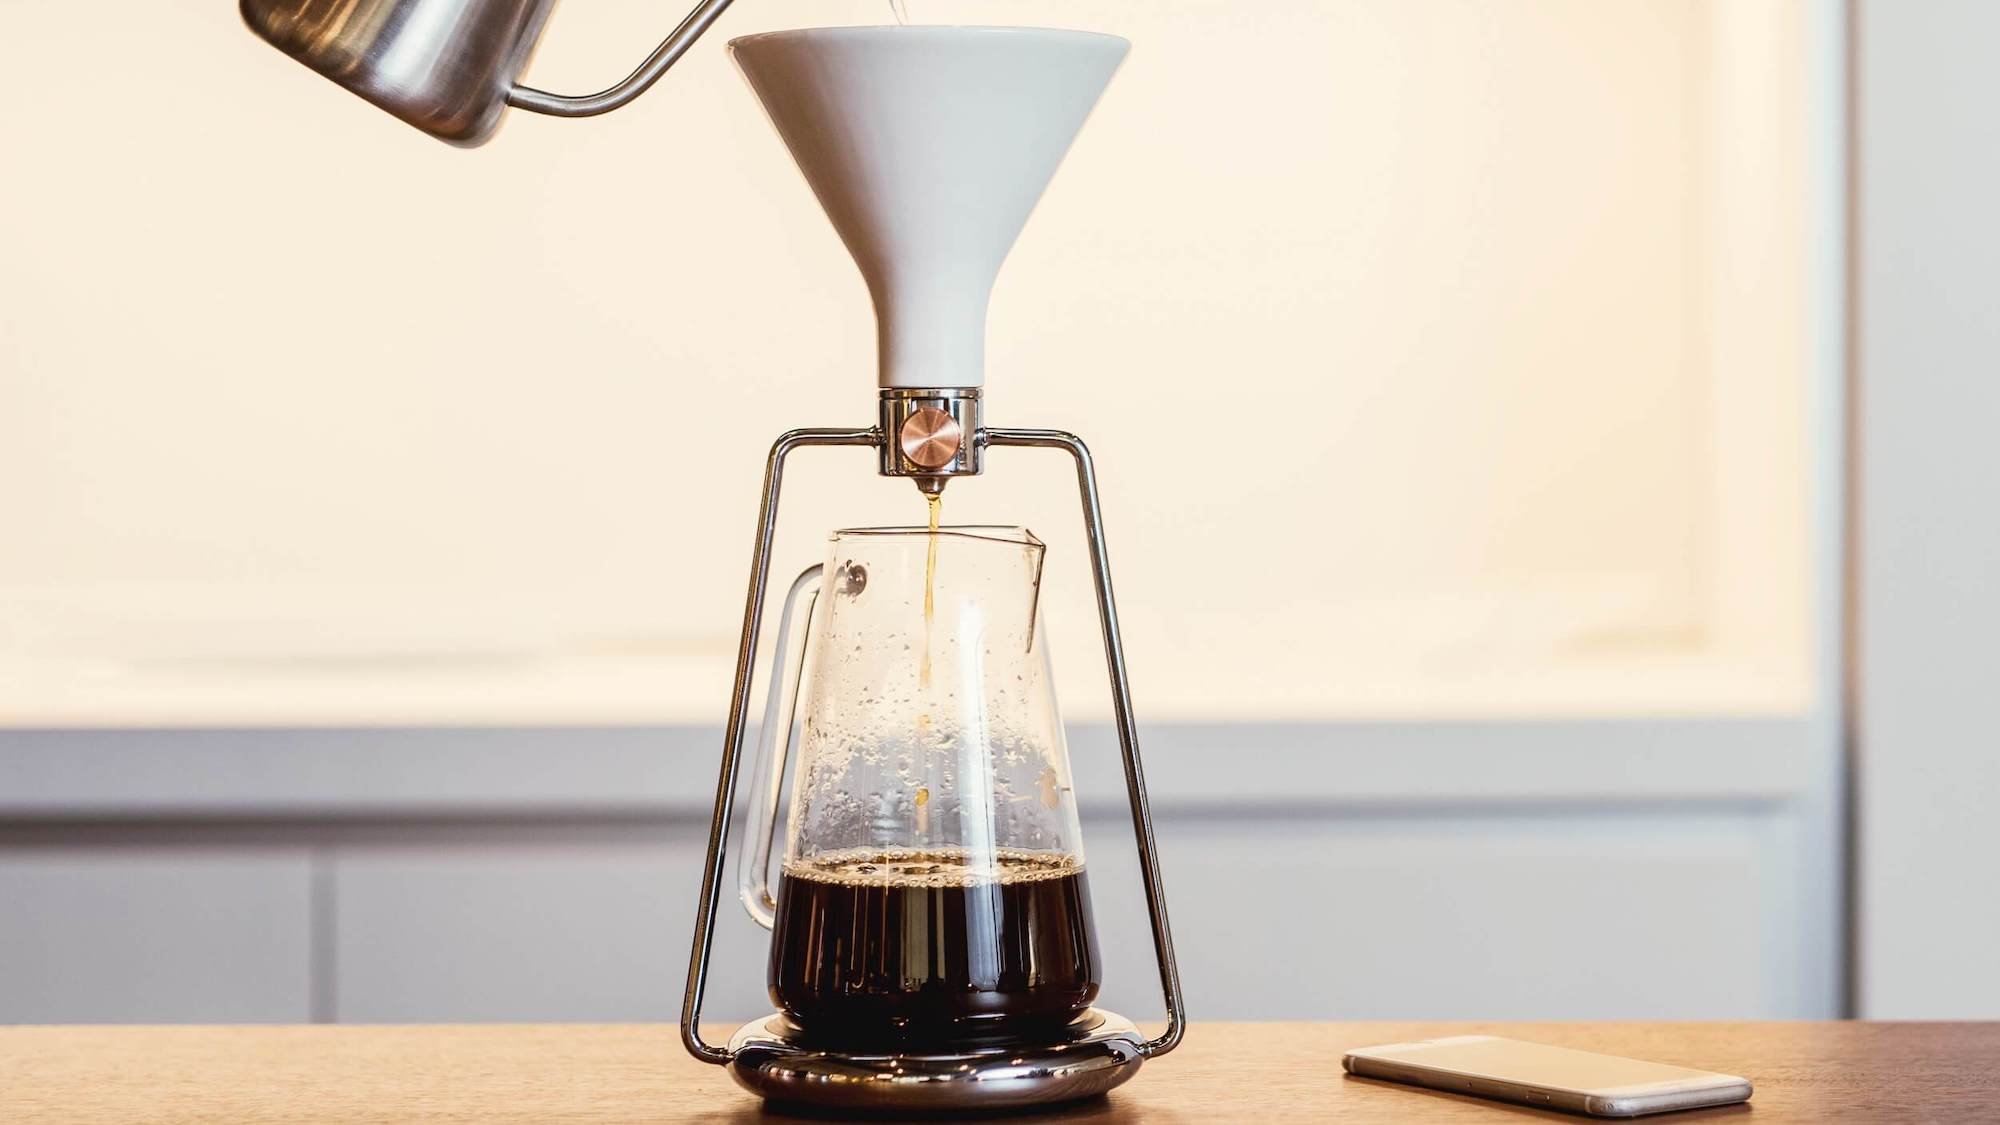 GOAT STORY GINA smart coffee instrument lets you brew in three deliciously different ways